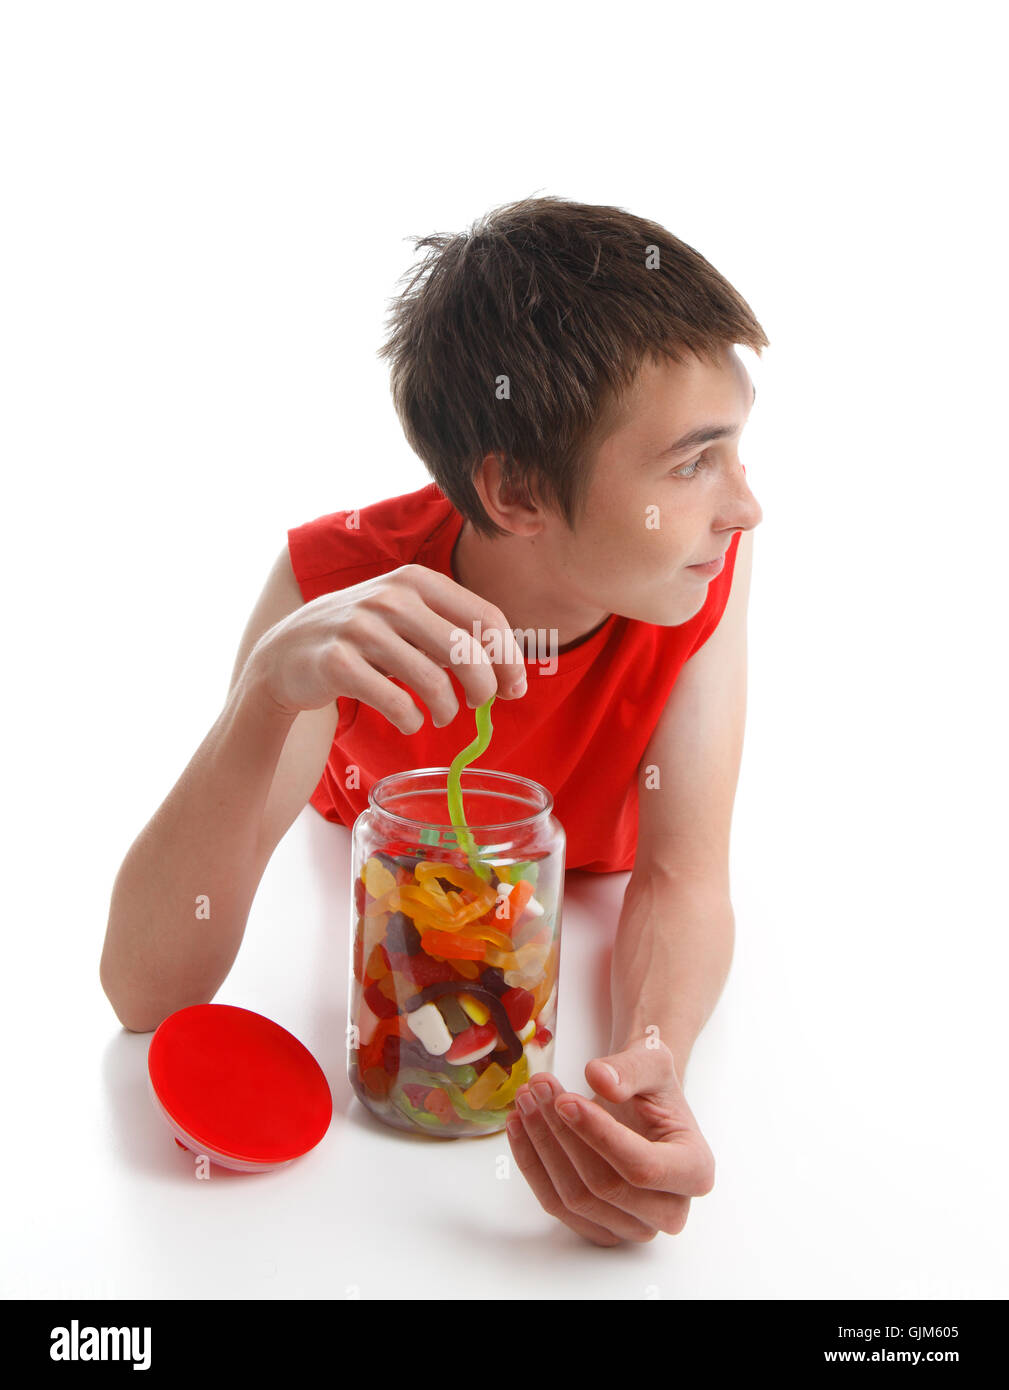 Boy with candy snake looking sideways Stock Photo